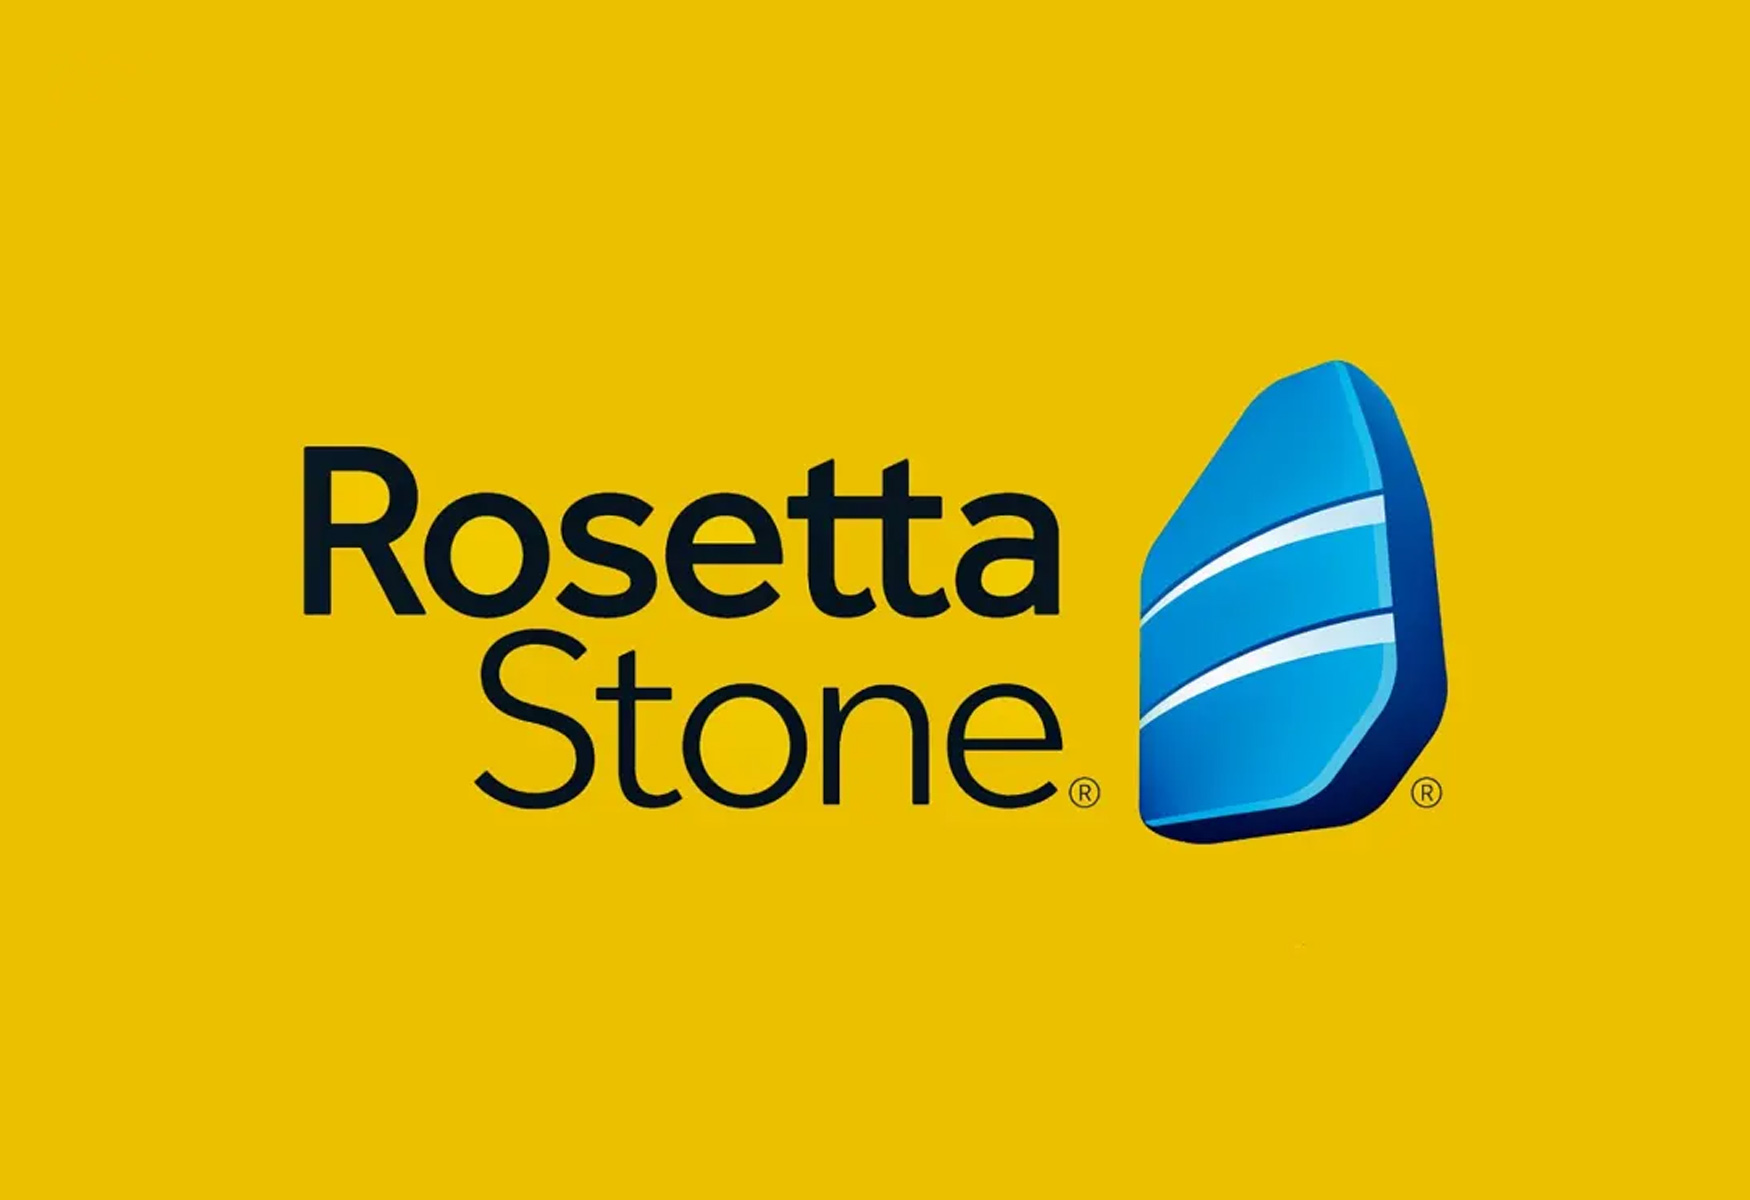 Learn A New Language With Rosetta Stone Lifetime Subscription On Sale For $150